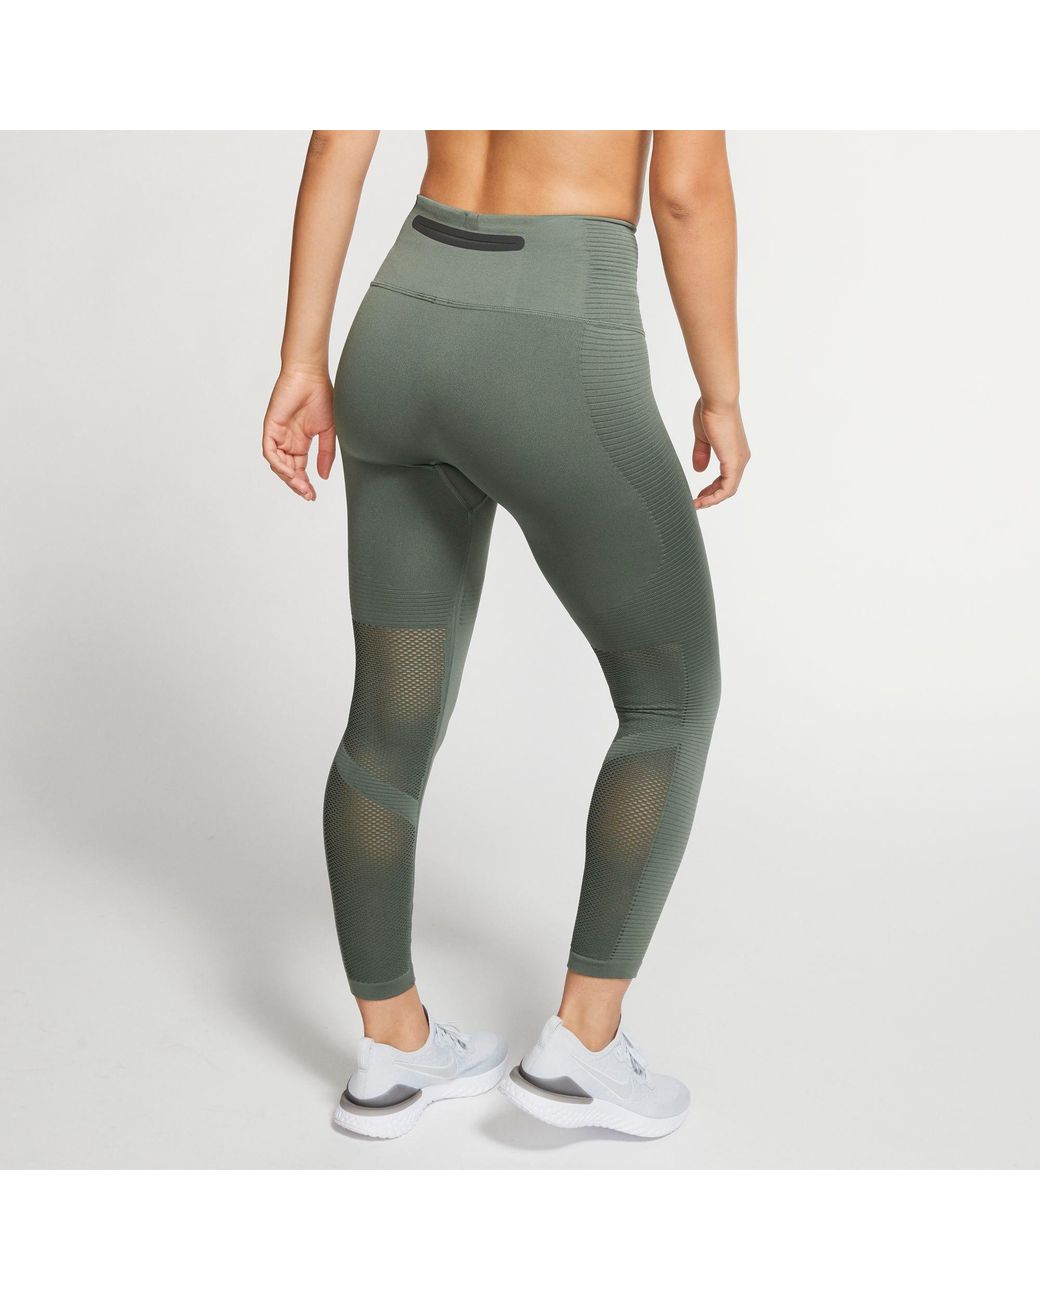 Nike Epic Lux Running Tights in Green 